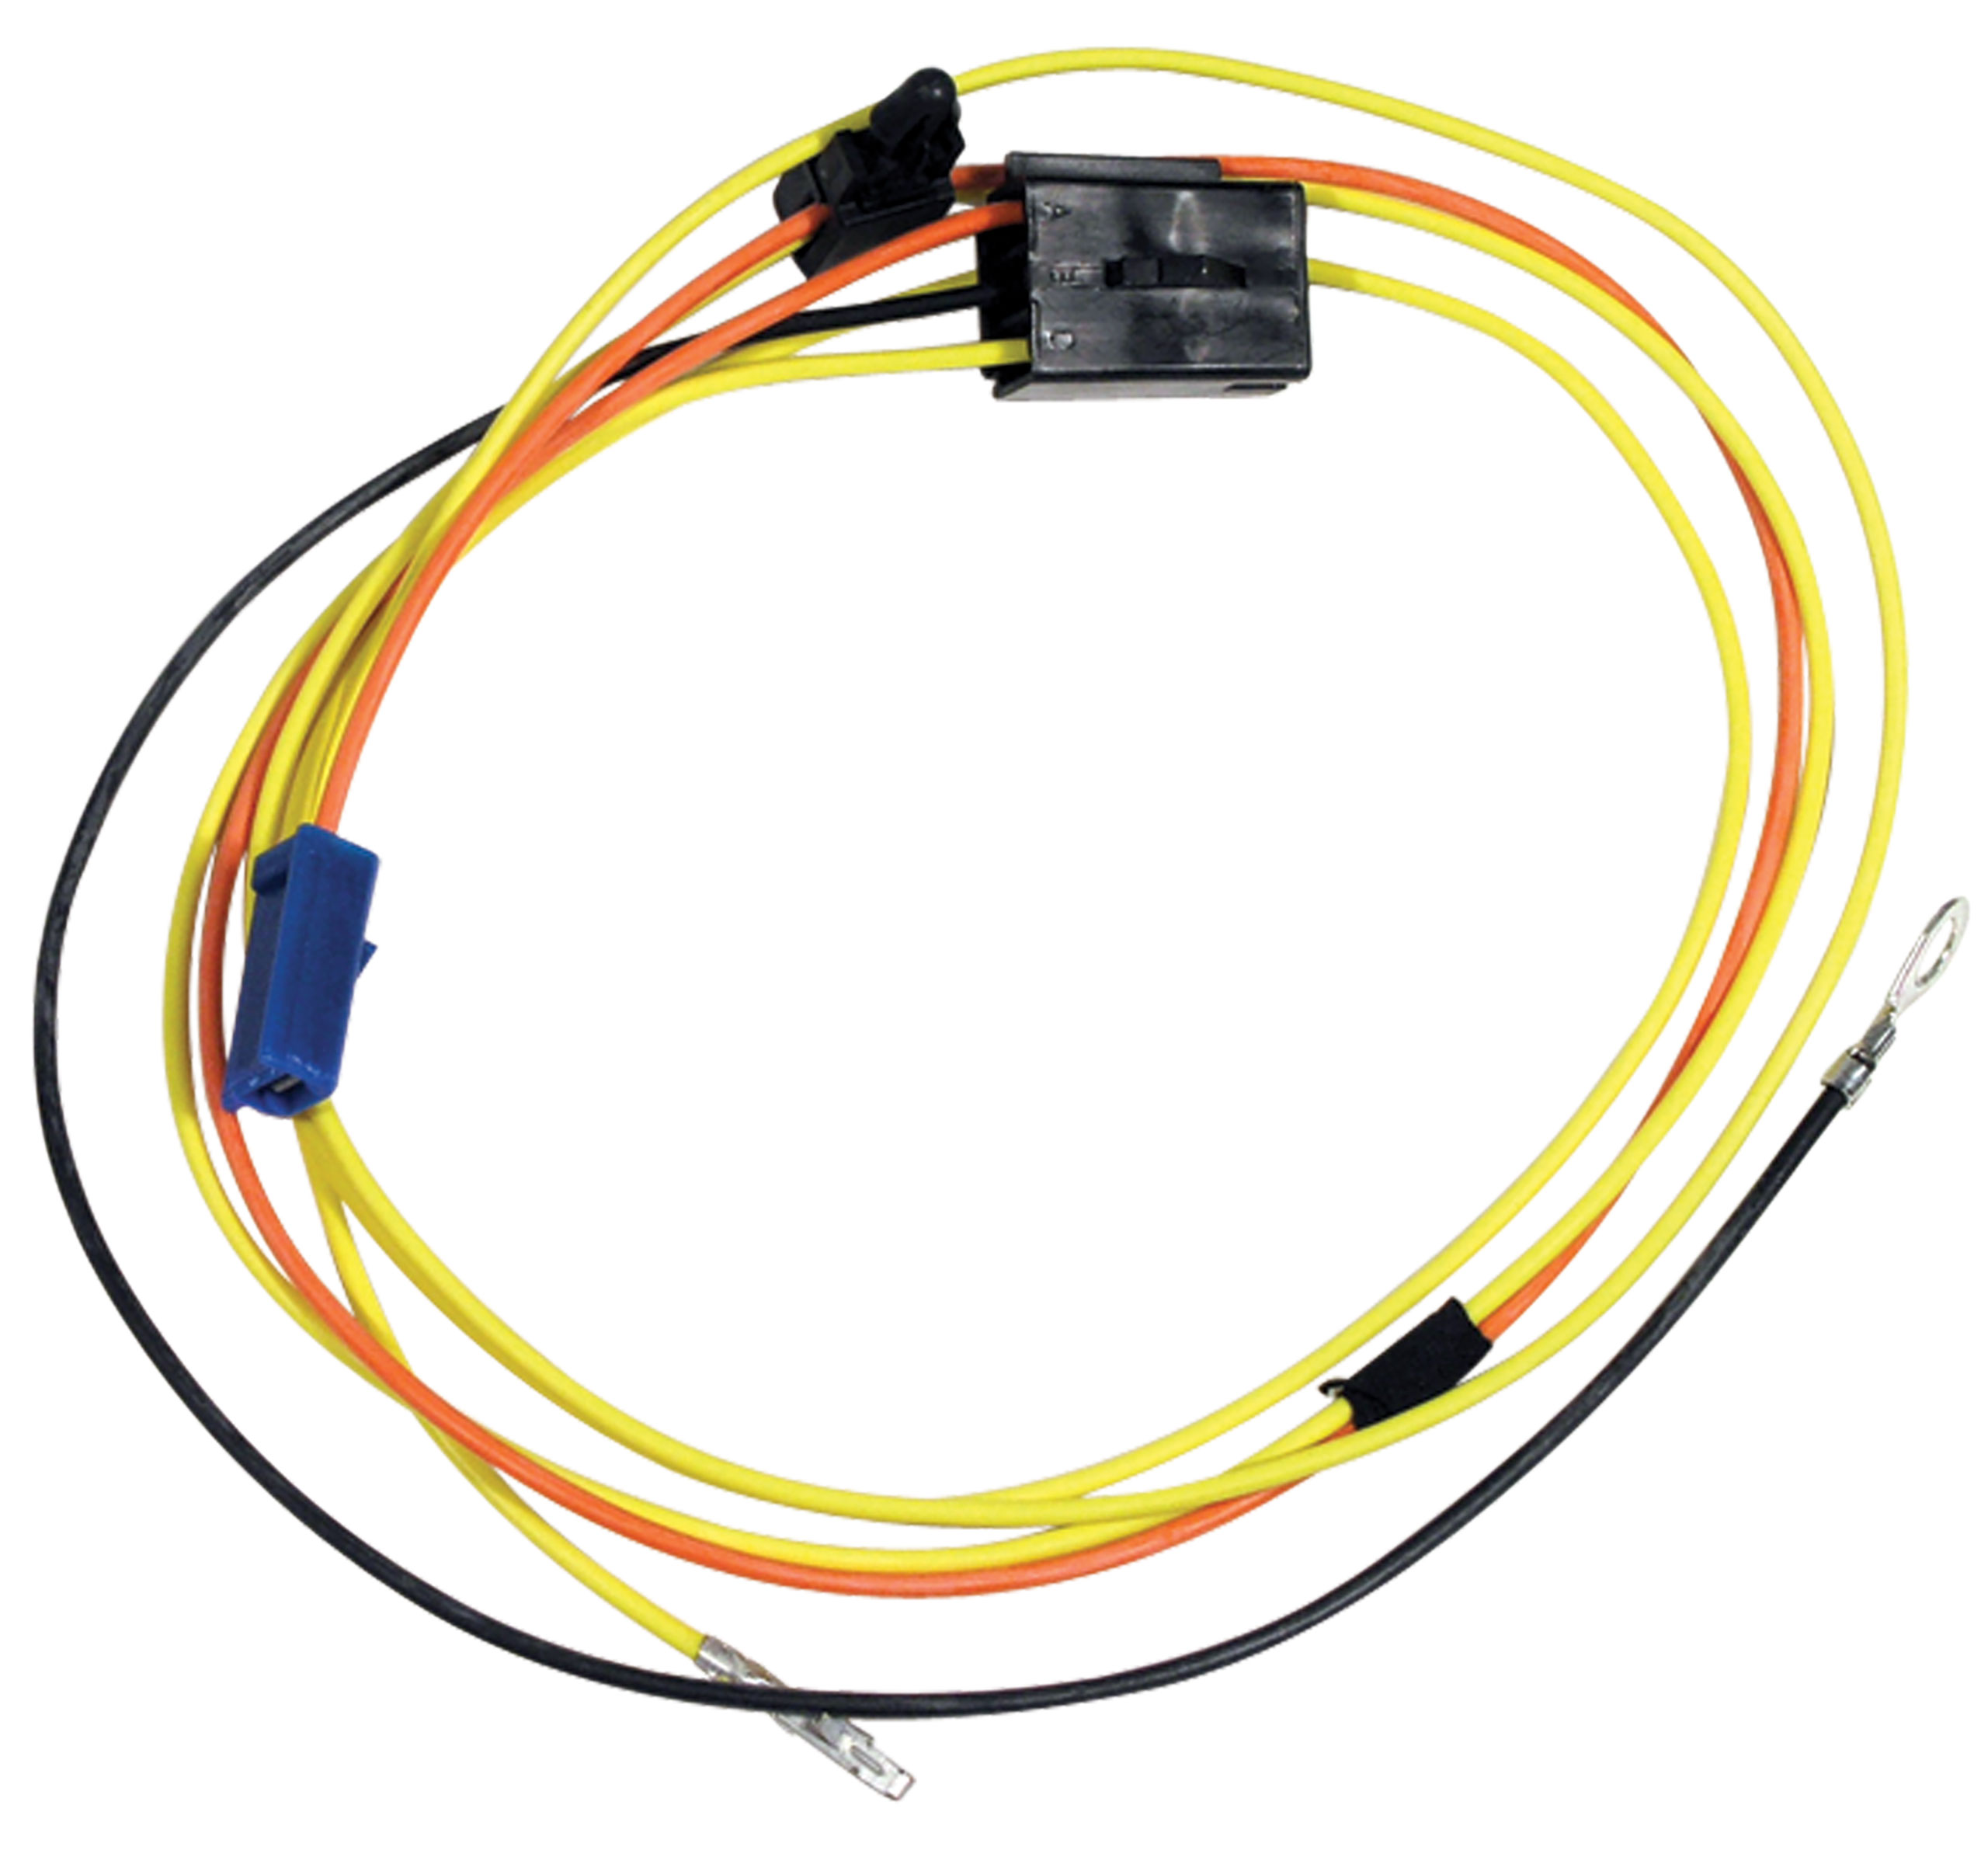 C3 1980-1982 Chevrolet Corvette Harness. Power Antenna Radio To Relay - Lectric Limited, Inc.